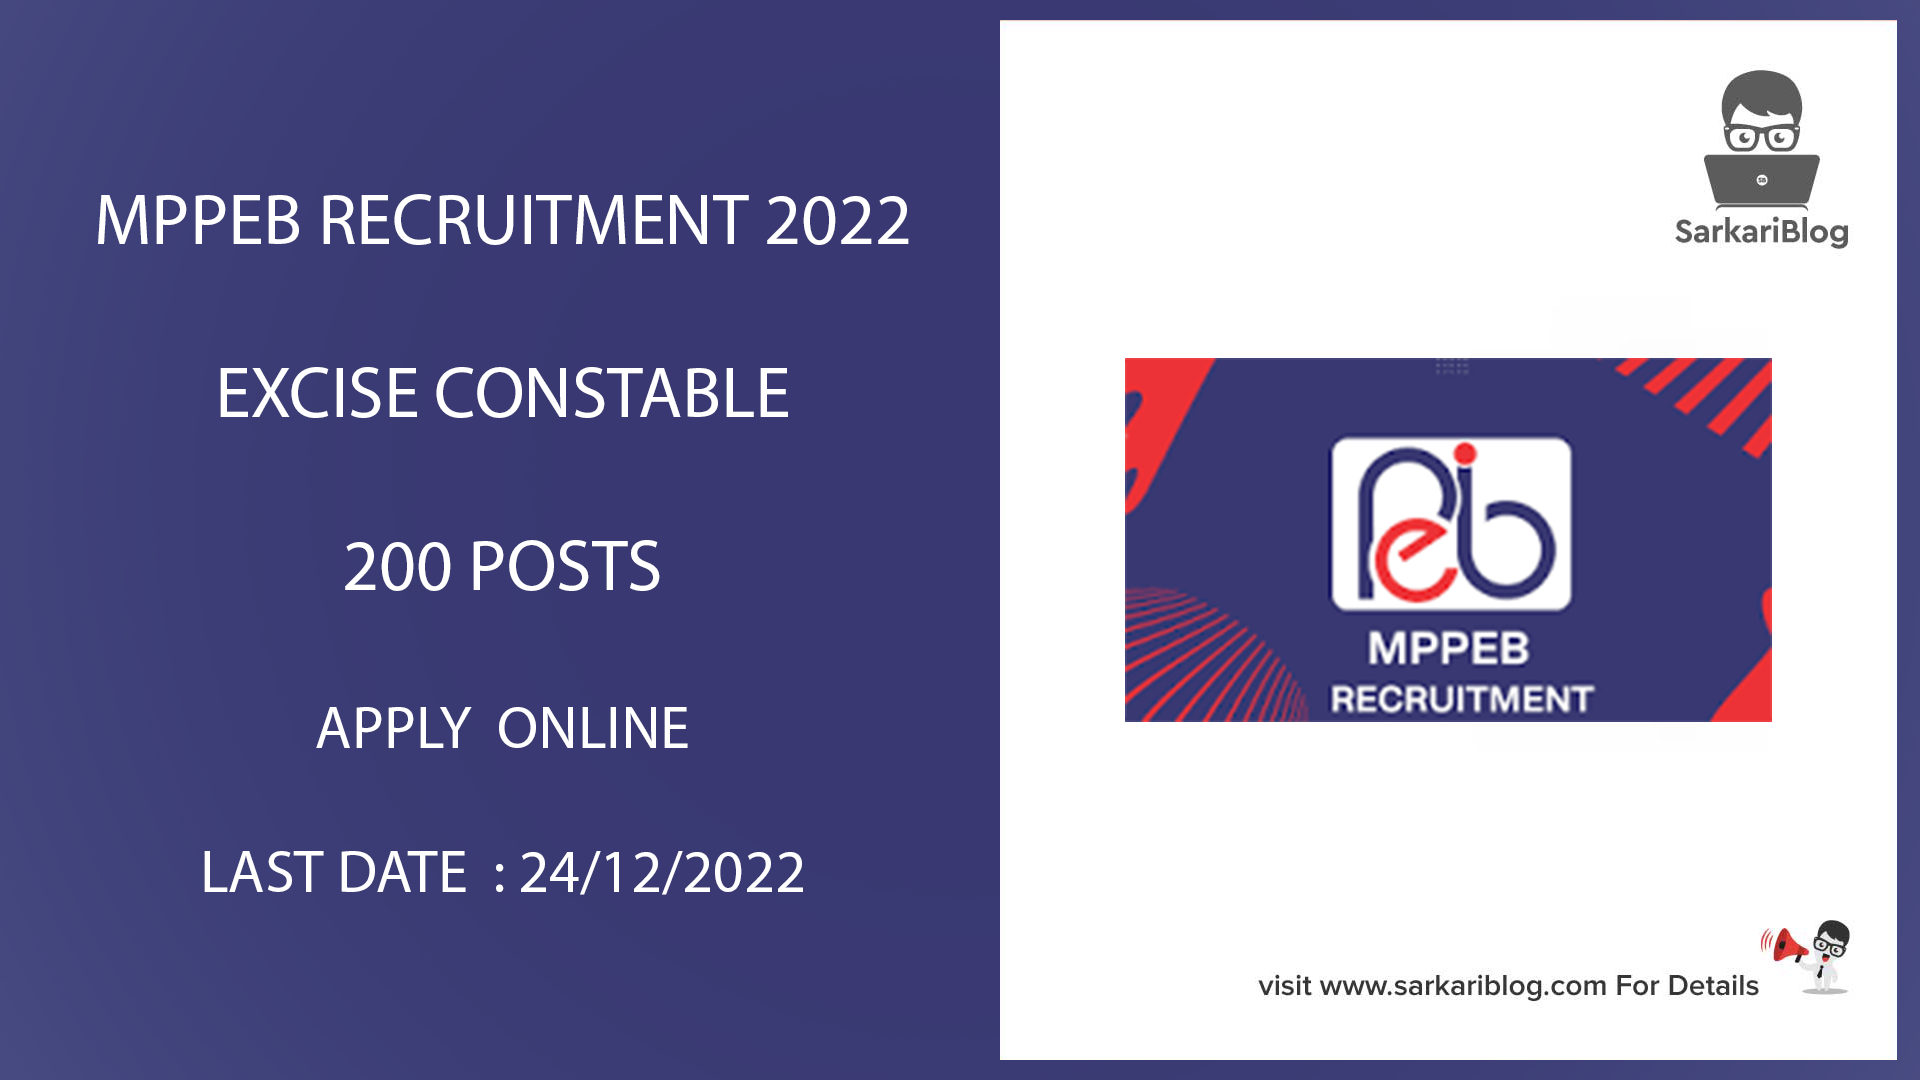 MPPEB EXCISE CONSTABLE 1 | MP EC Recruitment 2022 | Excise Constable Exam-200 Post | Apply Online 